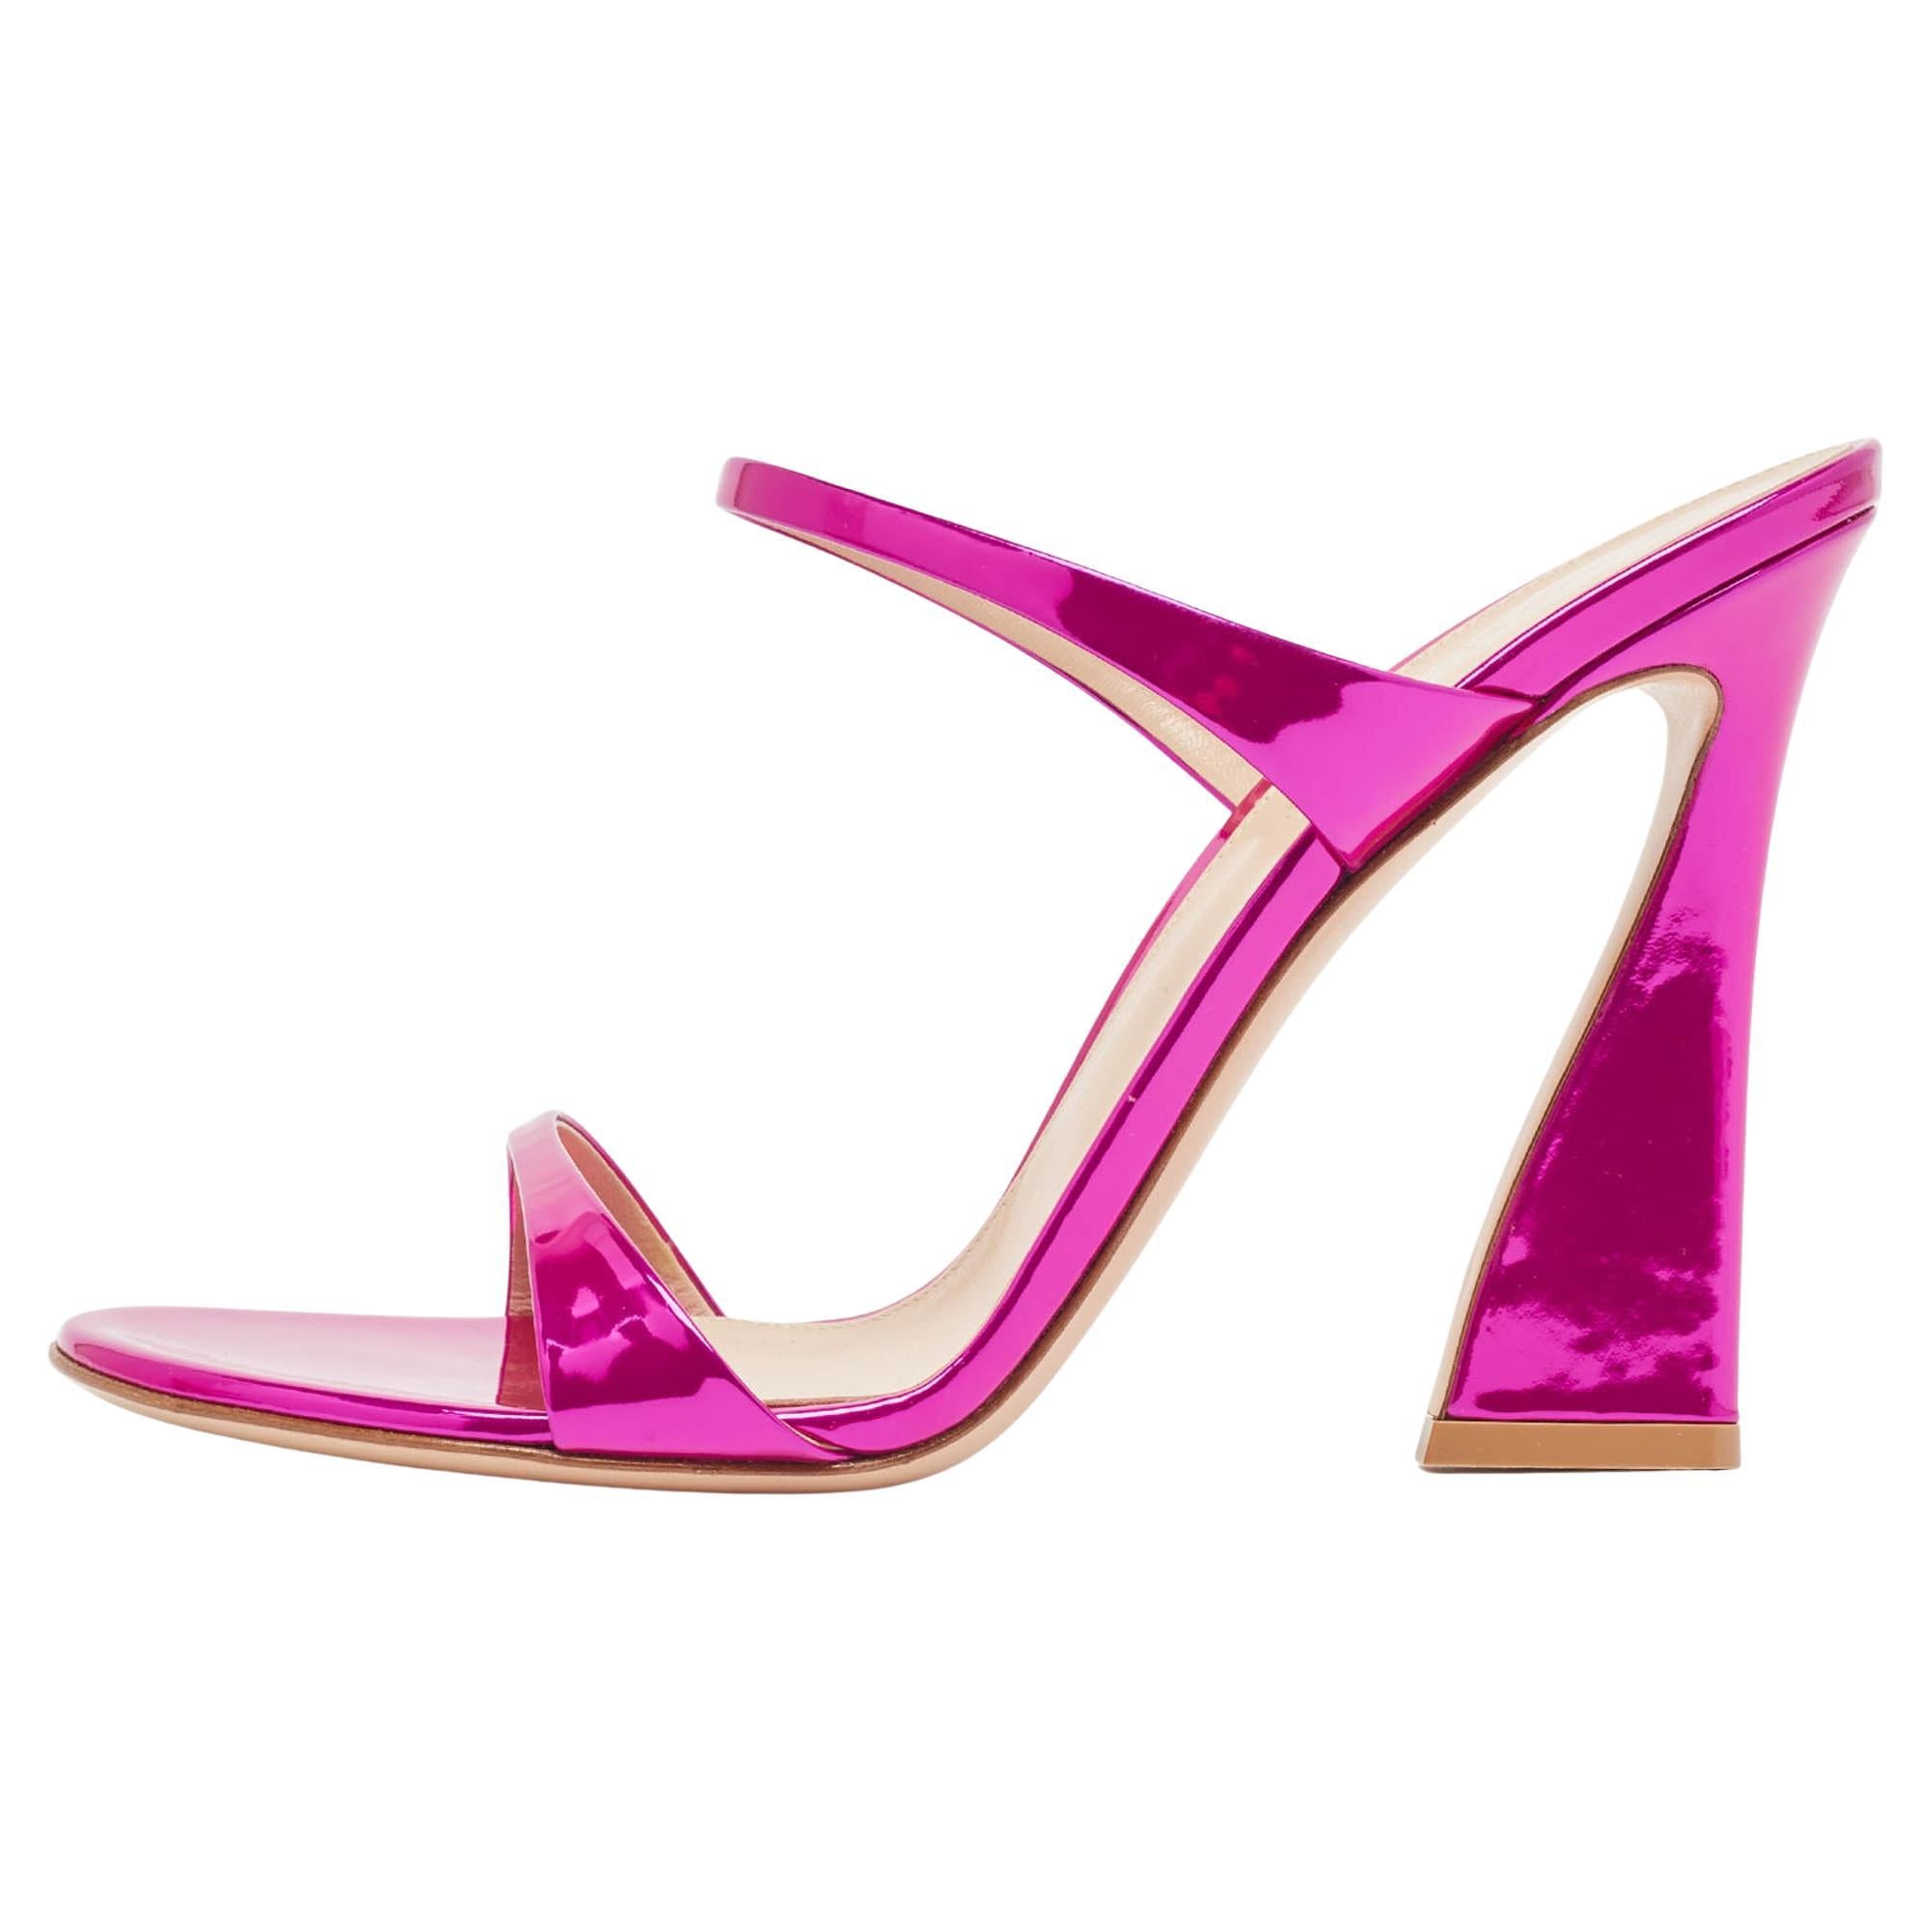 Gianvito Rossi Metallic Pink Leather Aura Sandals Size 39.5 For Sale